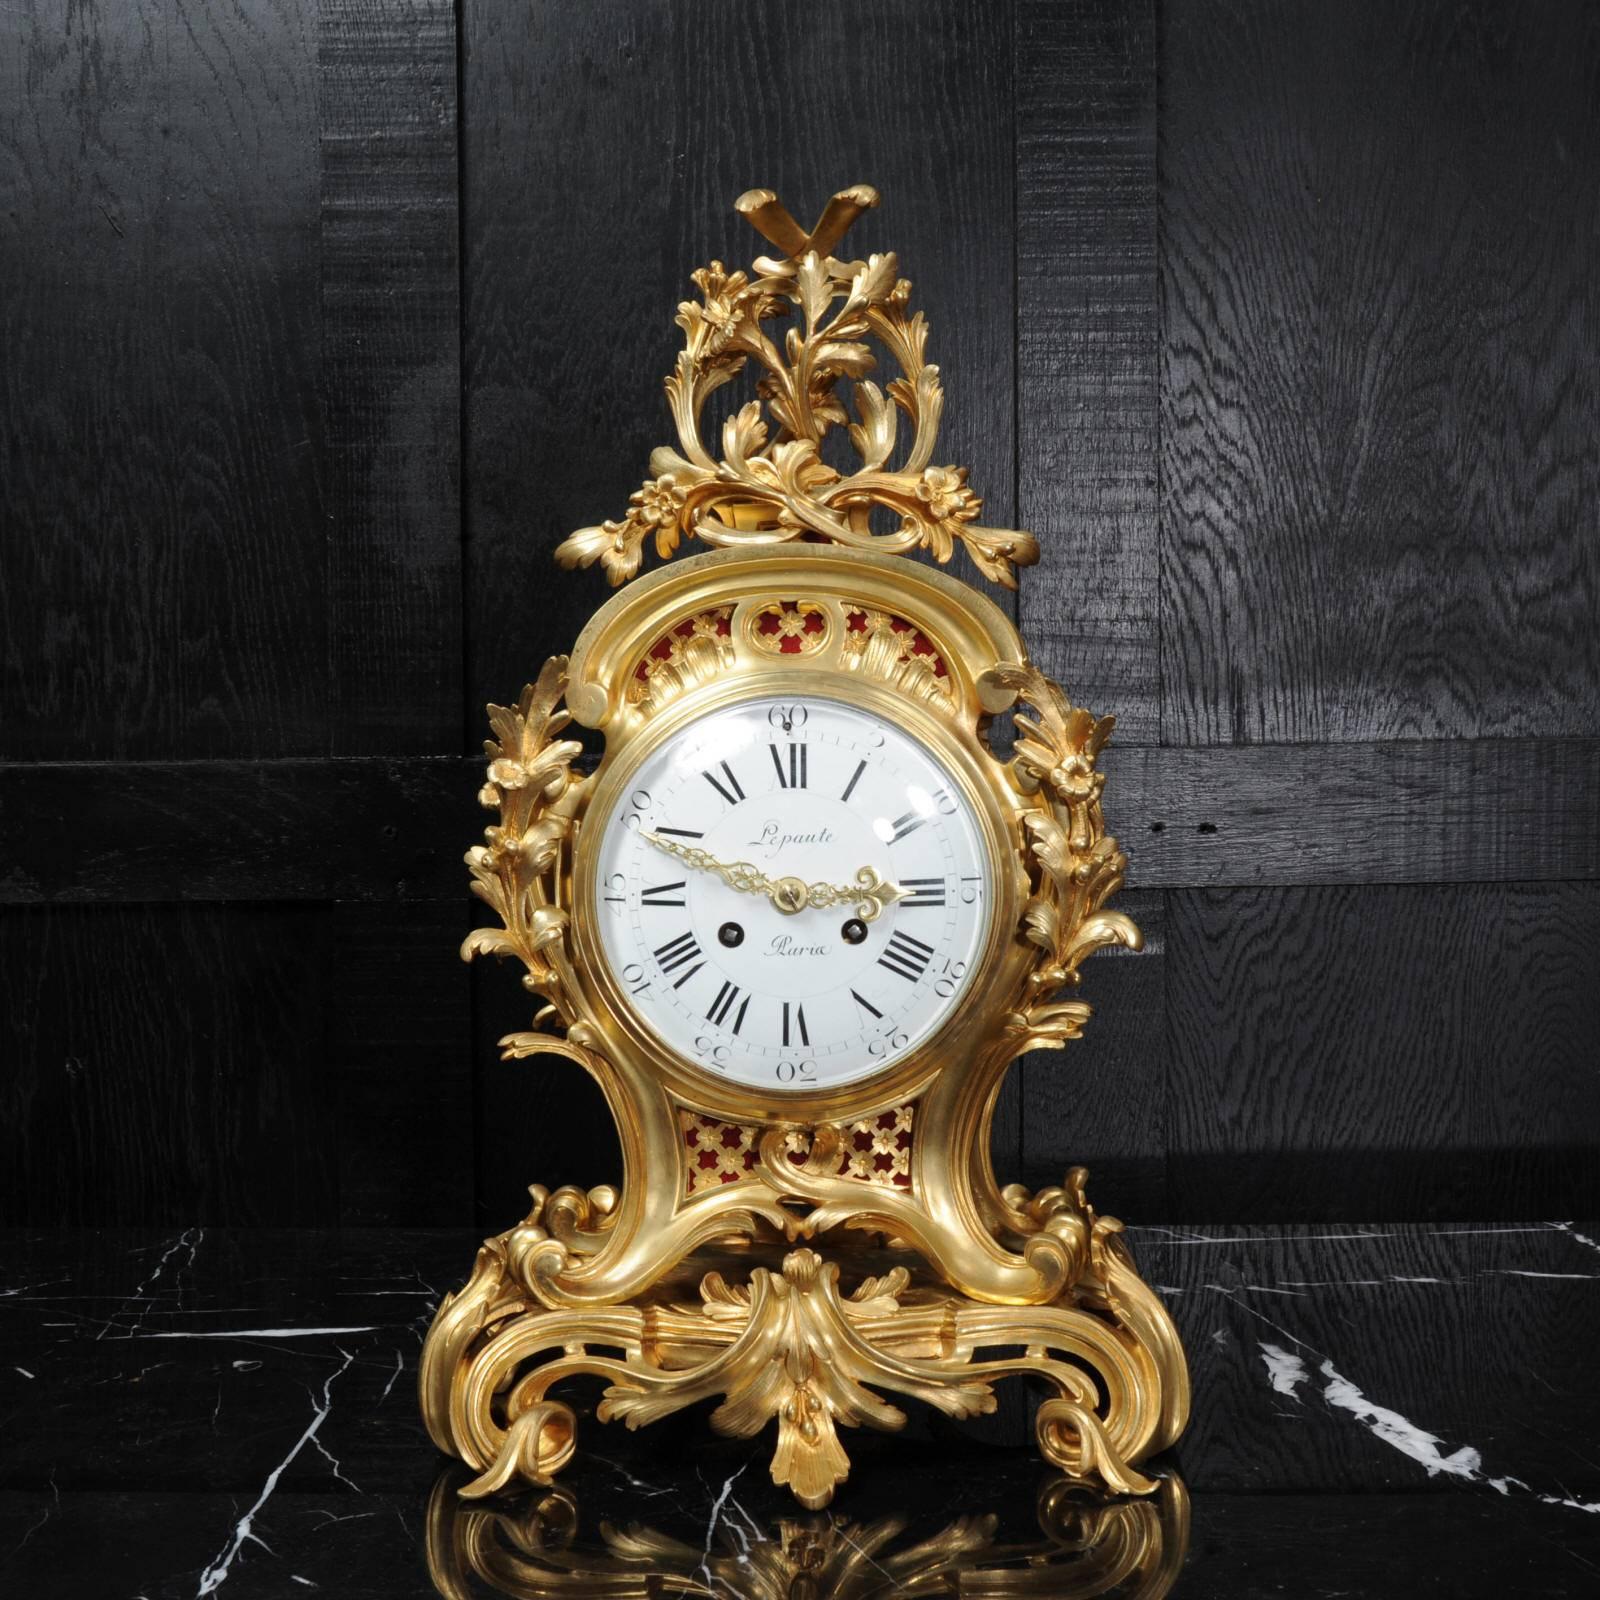 A large and very fine quality ormolu Rococo clock by Henry Lepaute of Paris, part of the illustrious Lepaute clockmaking dynesty. Formed in finely gilded bronze, sinuous scrolls and curves form the case with delicately modeled floral and foliate